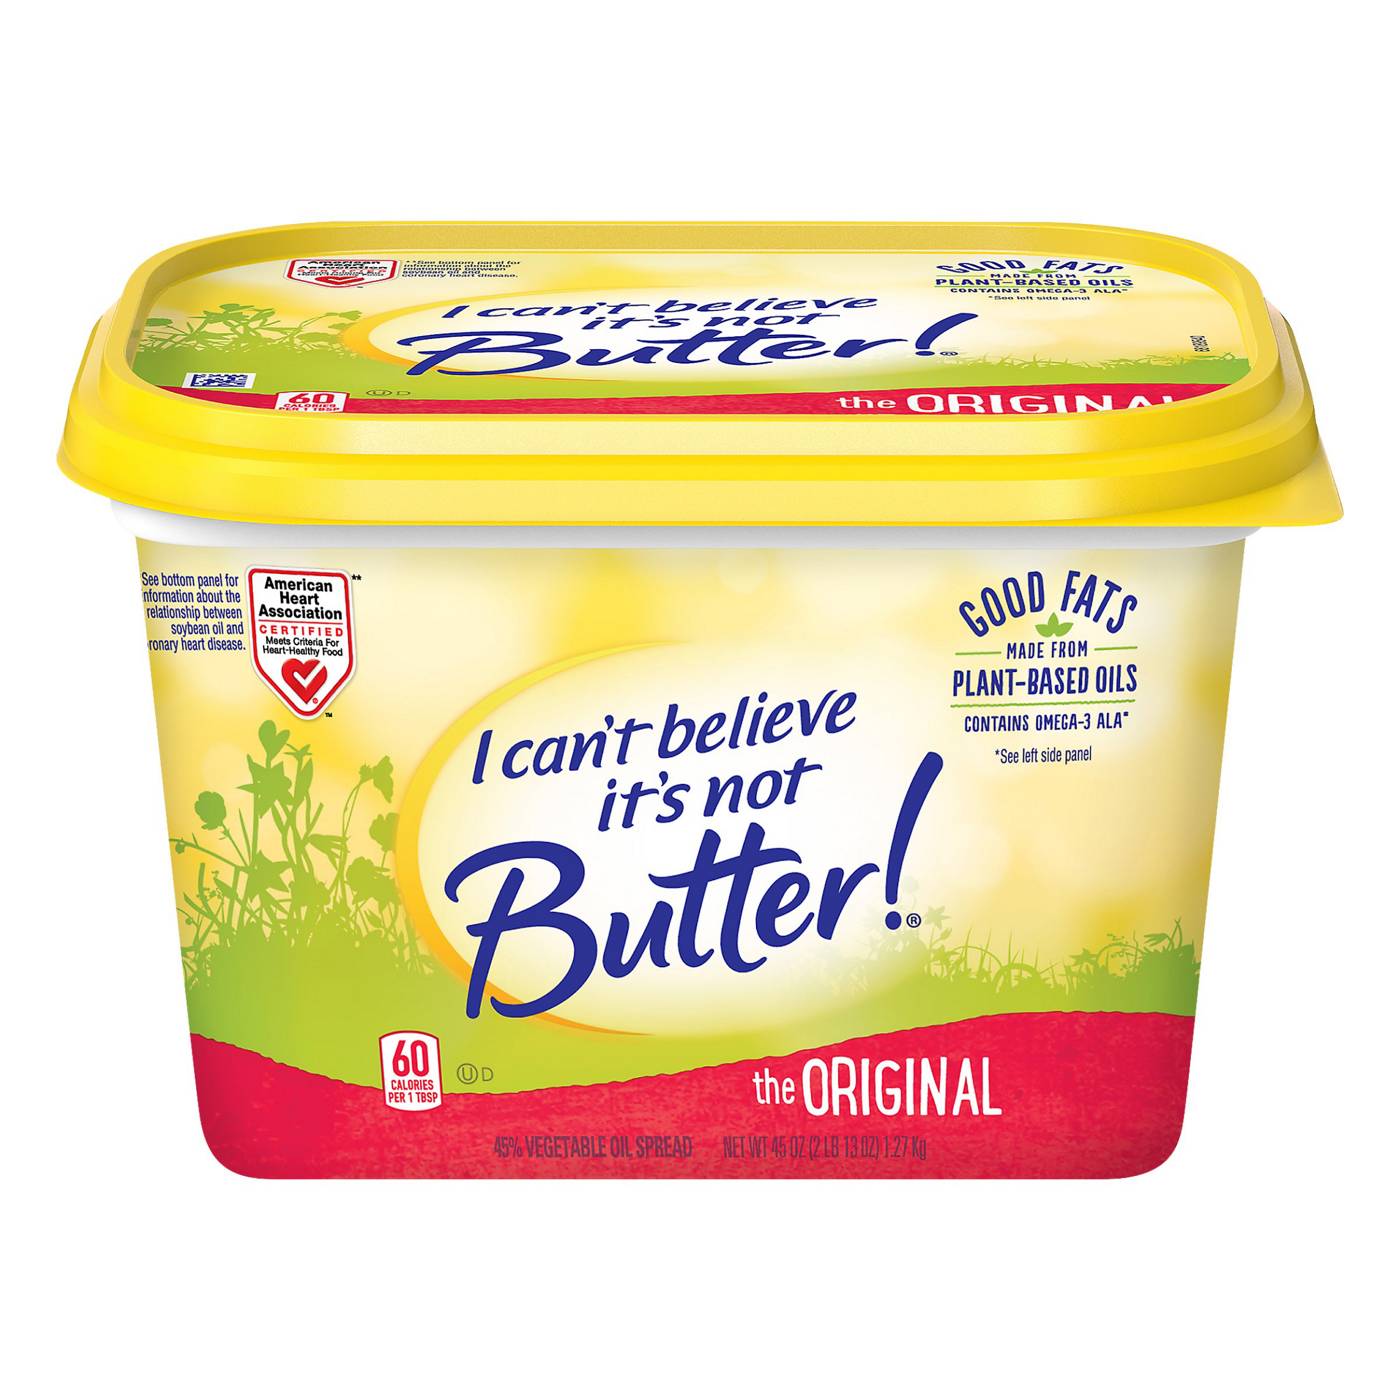 I Can't Believe It's Not Butter! Original Spread; image 4 of 12